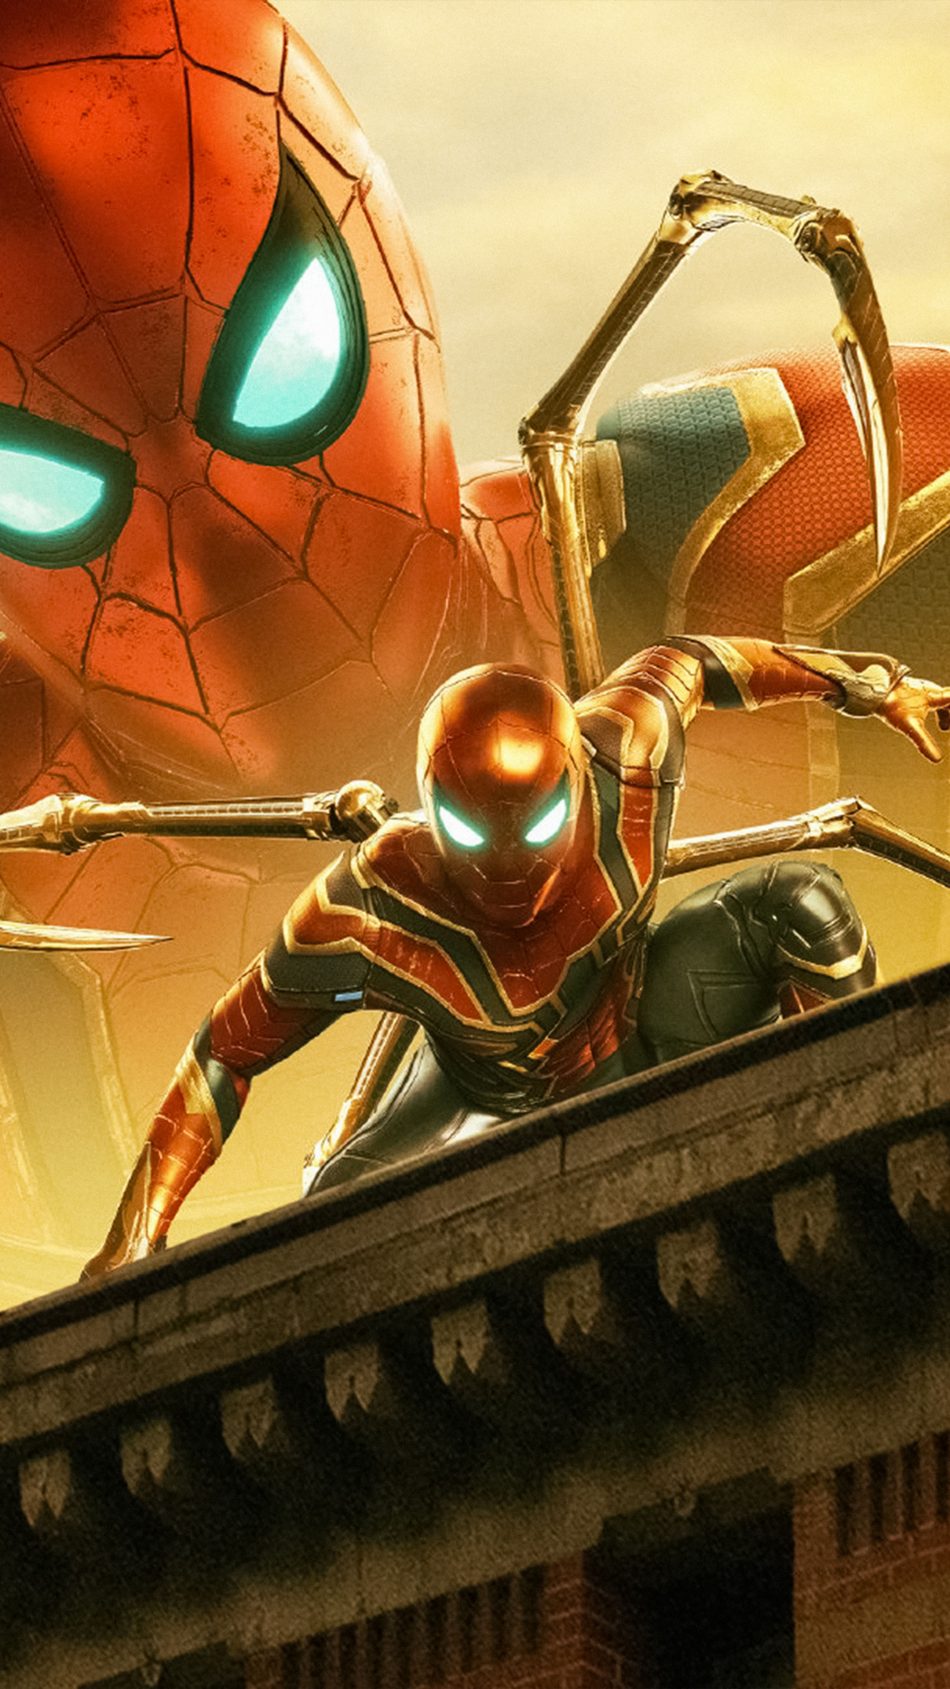 Iron Spider Spider-man Far From Home 2019 4k Ultra - Spider Man Far From Home - HD Wallpaper 